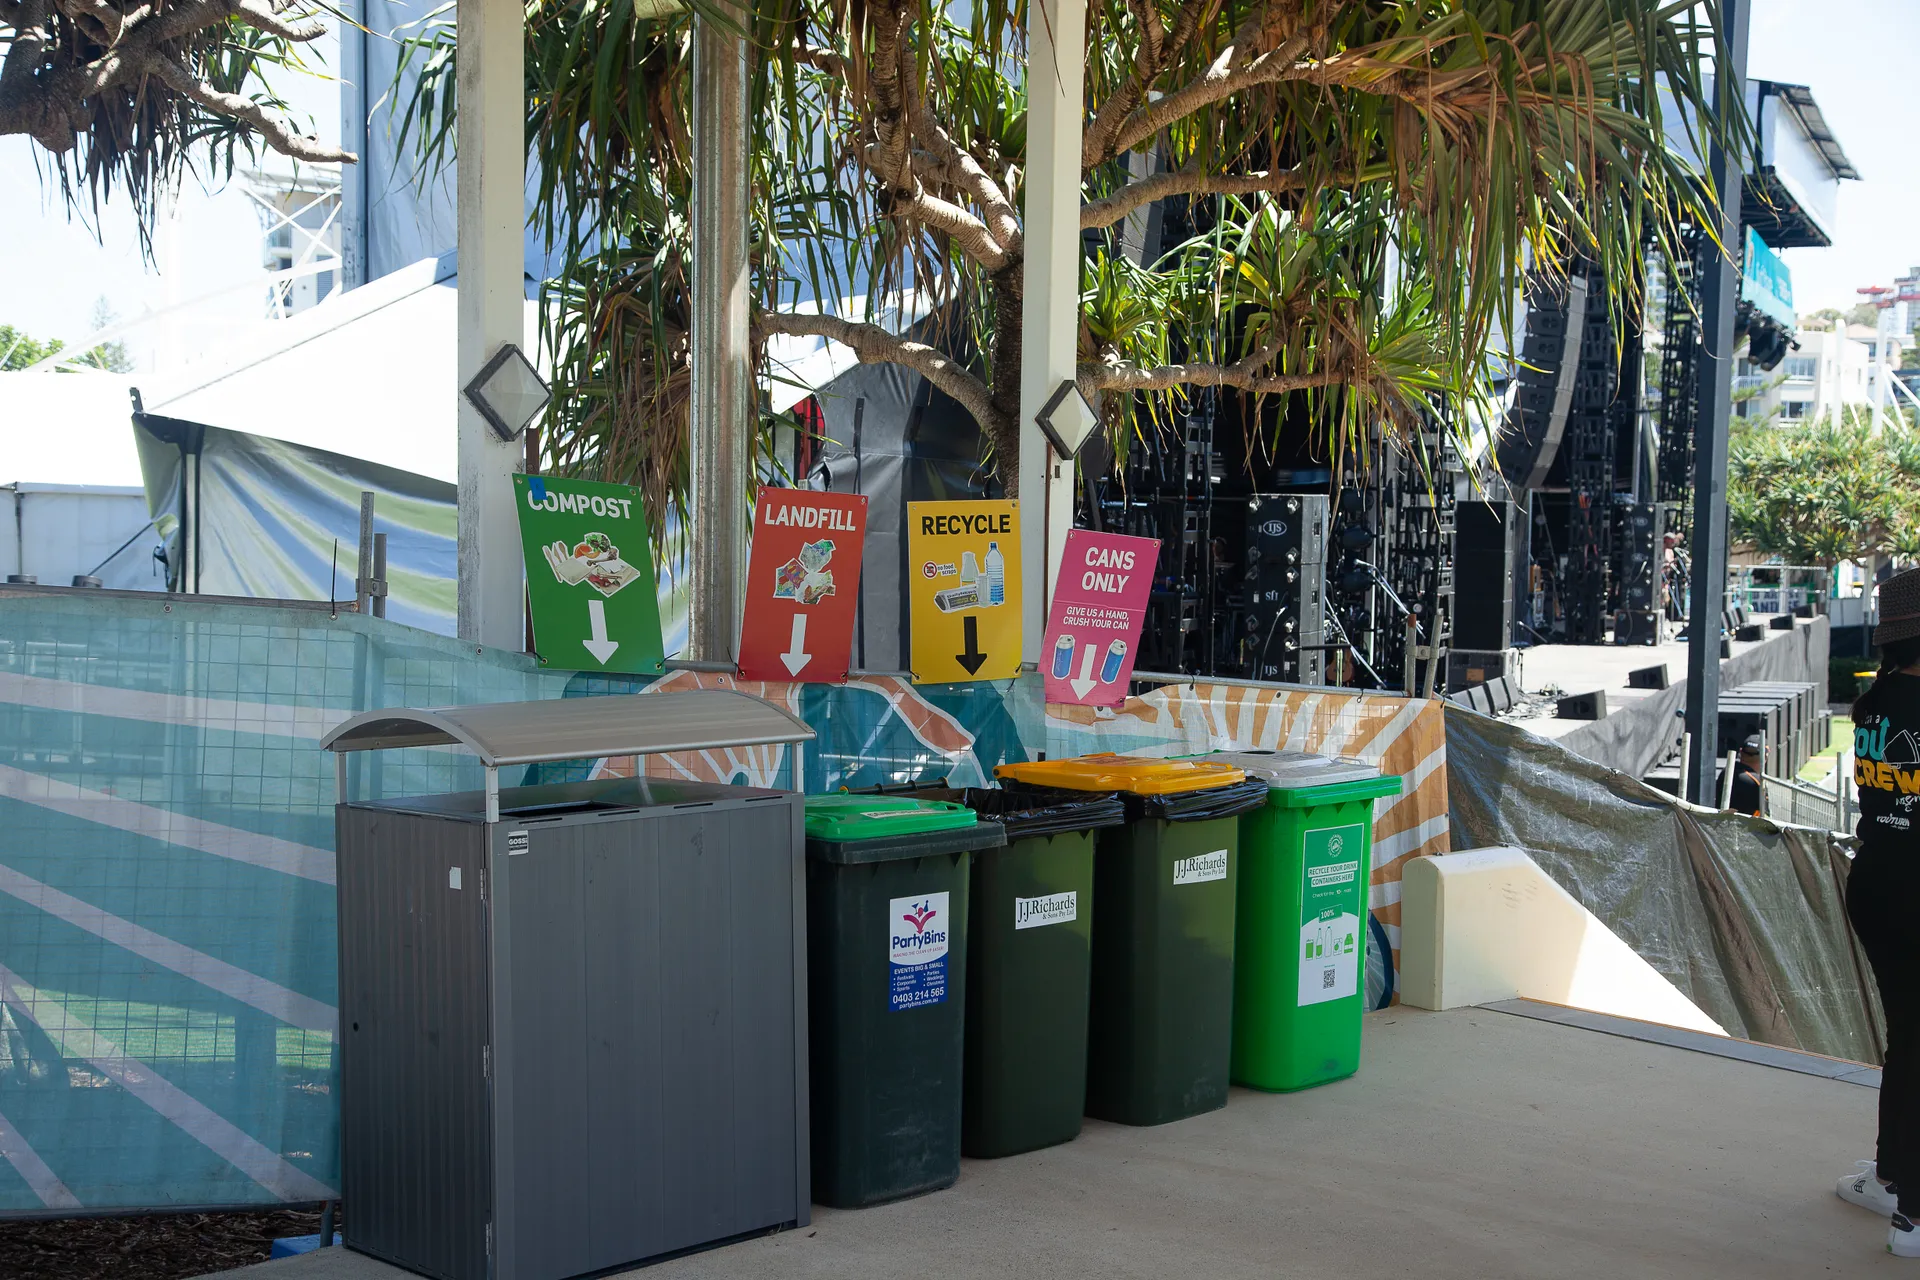 Bright and clear bin signage to assist with waste sorting and recycling